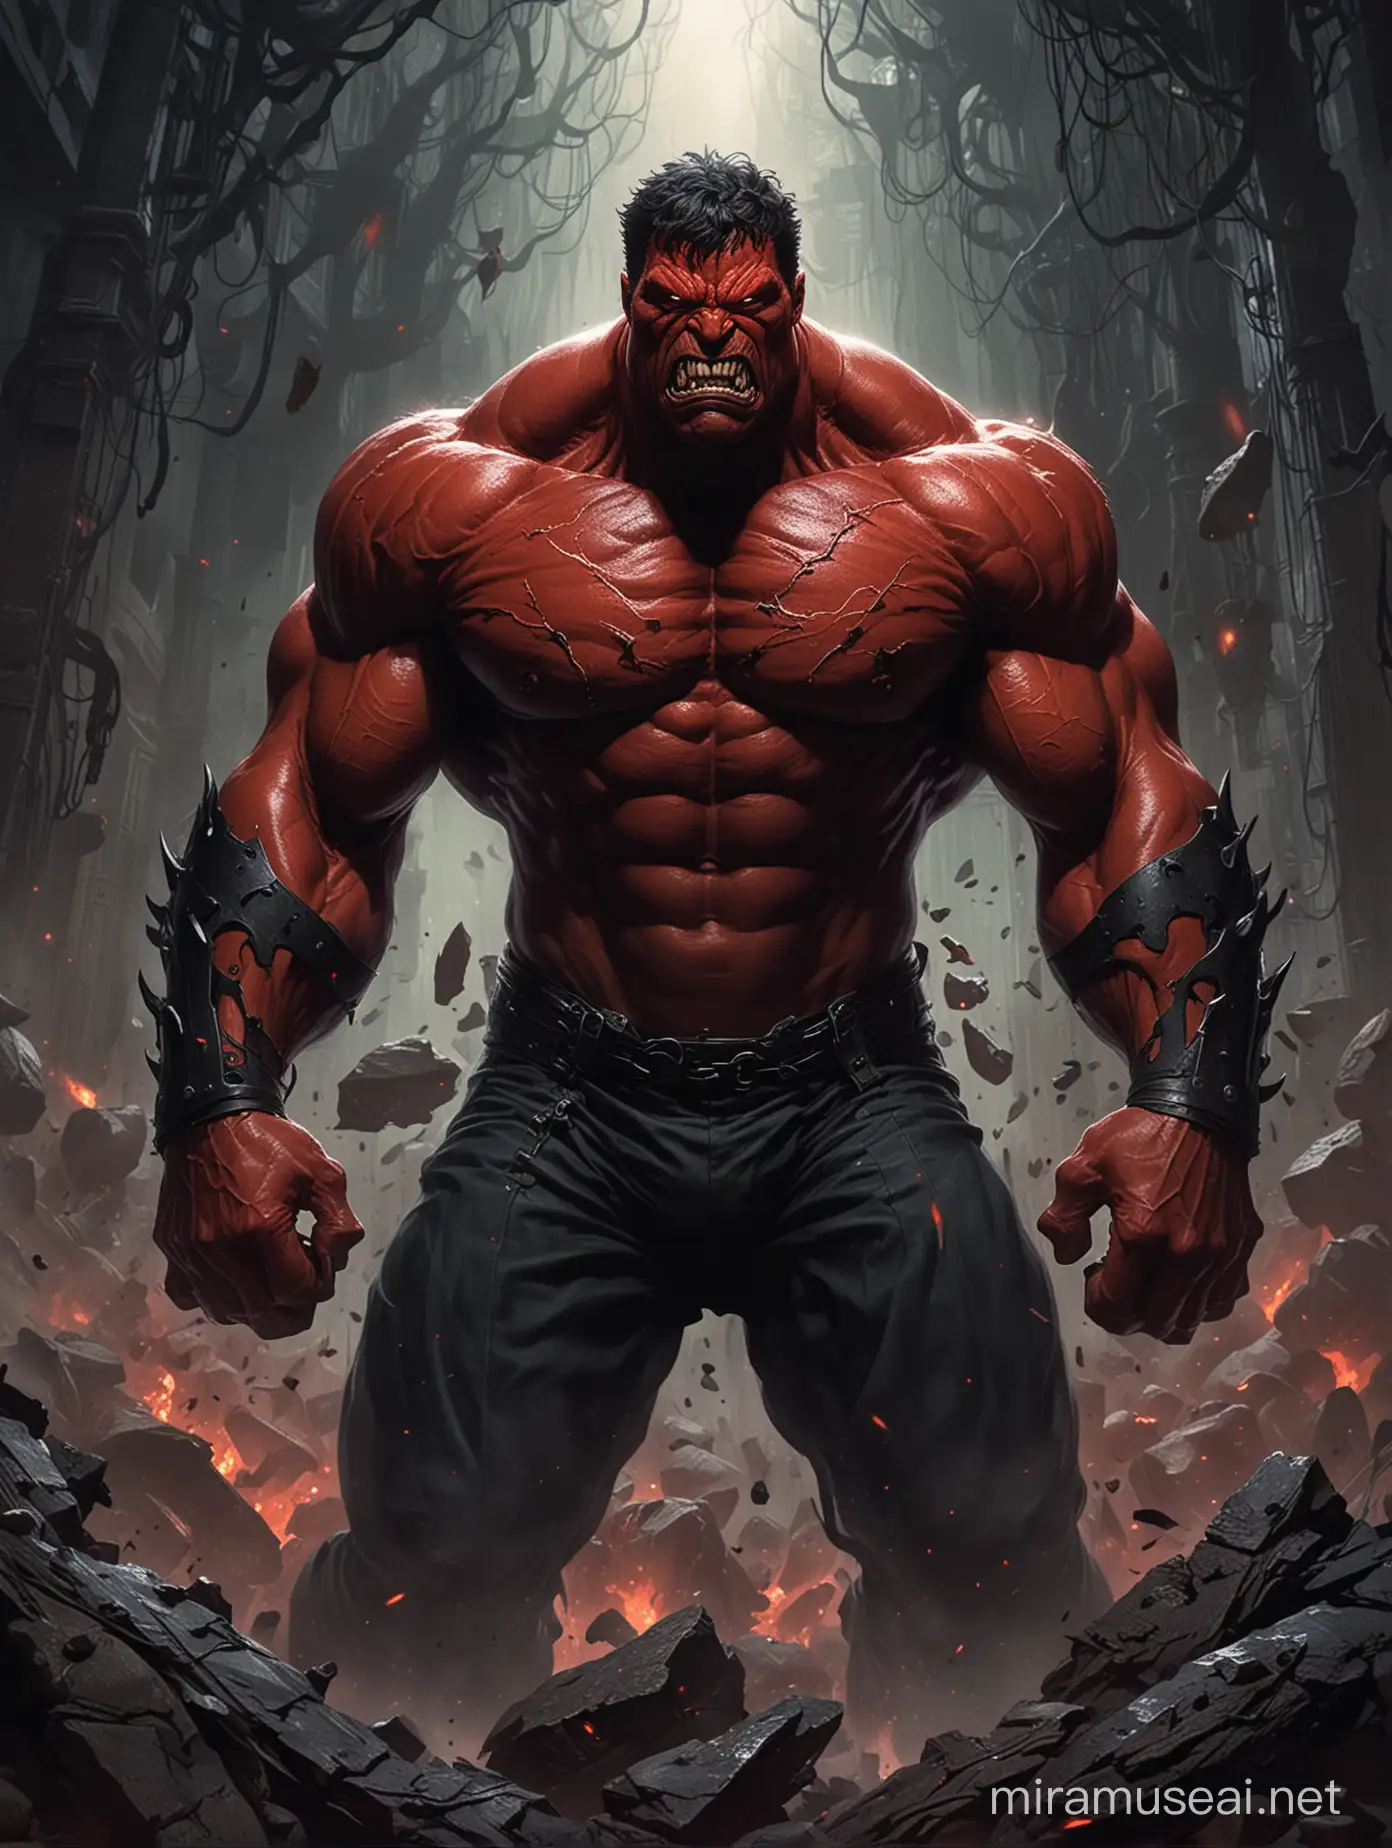 "Journey into the shadows with Midjourney AI as we unveil the enigmatic persona of the Red Hulk as a dark lord. Cloaked in darkness and wielding the power of the abyss, the Red Hulk emerges as a formidable force to be reckoned with. With eyes ablaze with infernal fury, he commands legions of dark minions and bends the very fabric of reality to his will. Clad in armor forged from the depths of despair, each step he takes echoes with the weight of his sinister purpose. As he casts his gaze upon the world, fear and trepidation follow in his wake, for none can stand against the might of the dark lord Red Hulk. Through its narrative, Midjourney AI invites audiences to explore the depths of darkness embodied by the Red Hulk, a figure of malevolent power whose shadow looms large over all who dare to defy him."